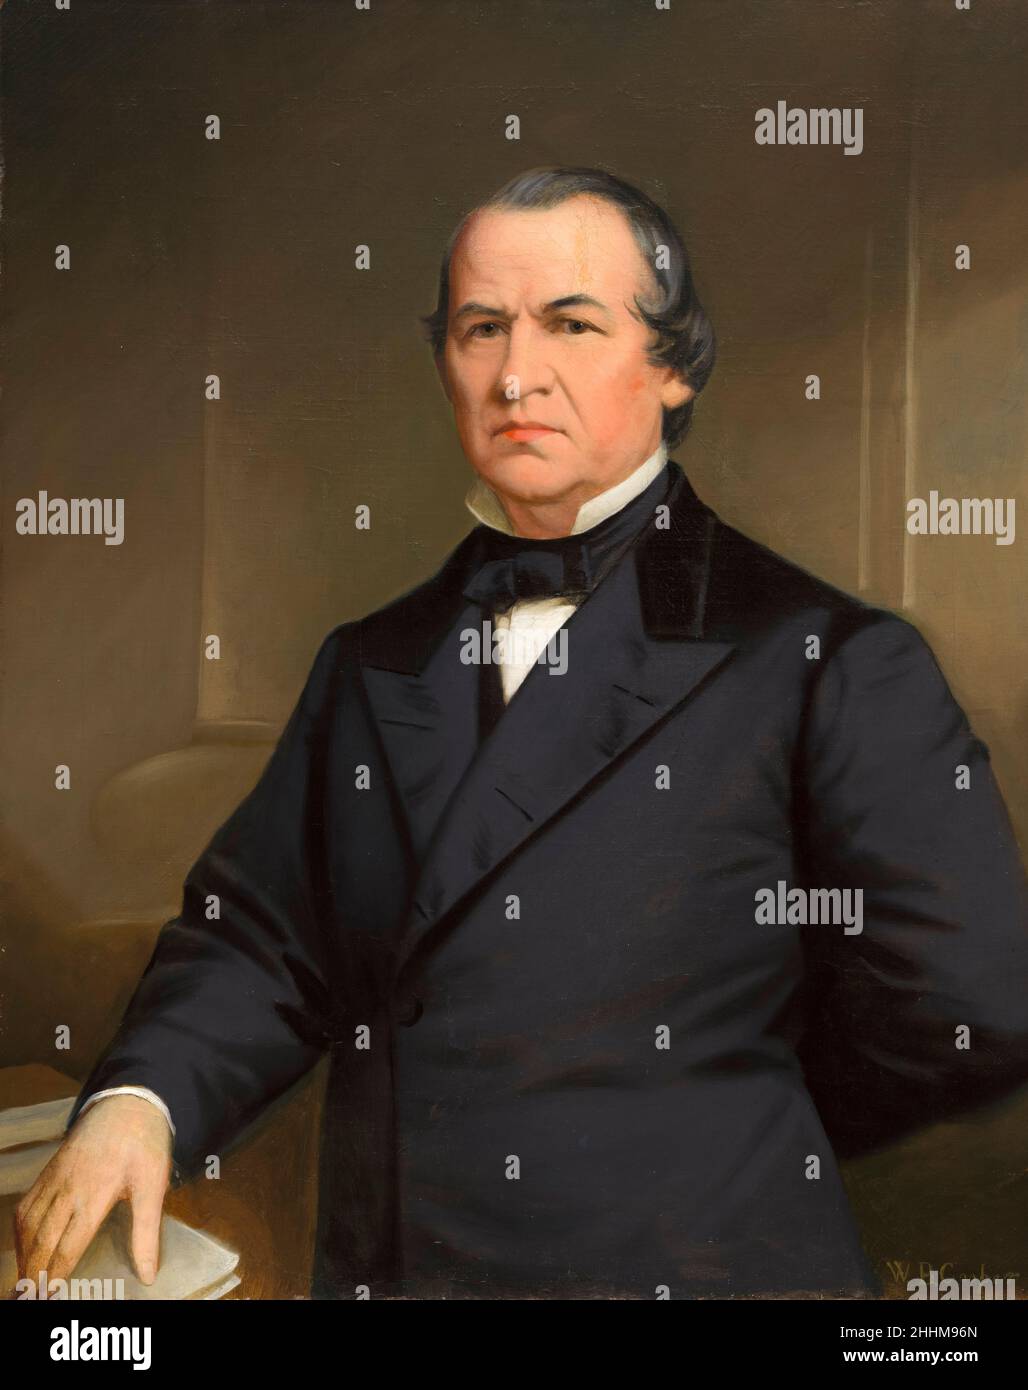 Andrew Johnson (1808-1875), 17th President of the United States (1865-1869), portrait painting by Washington Bogart Cooper, after 1866 Stock Photo